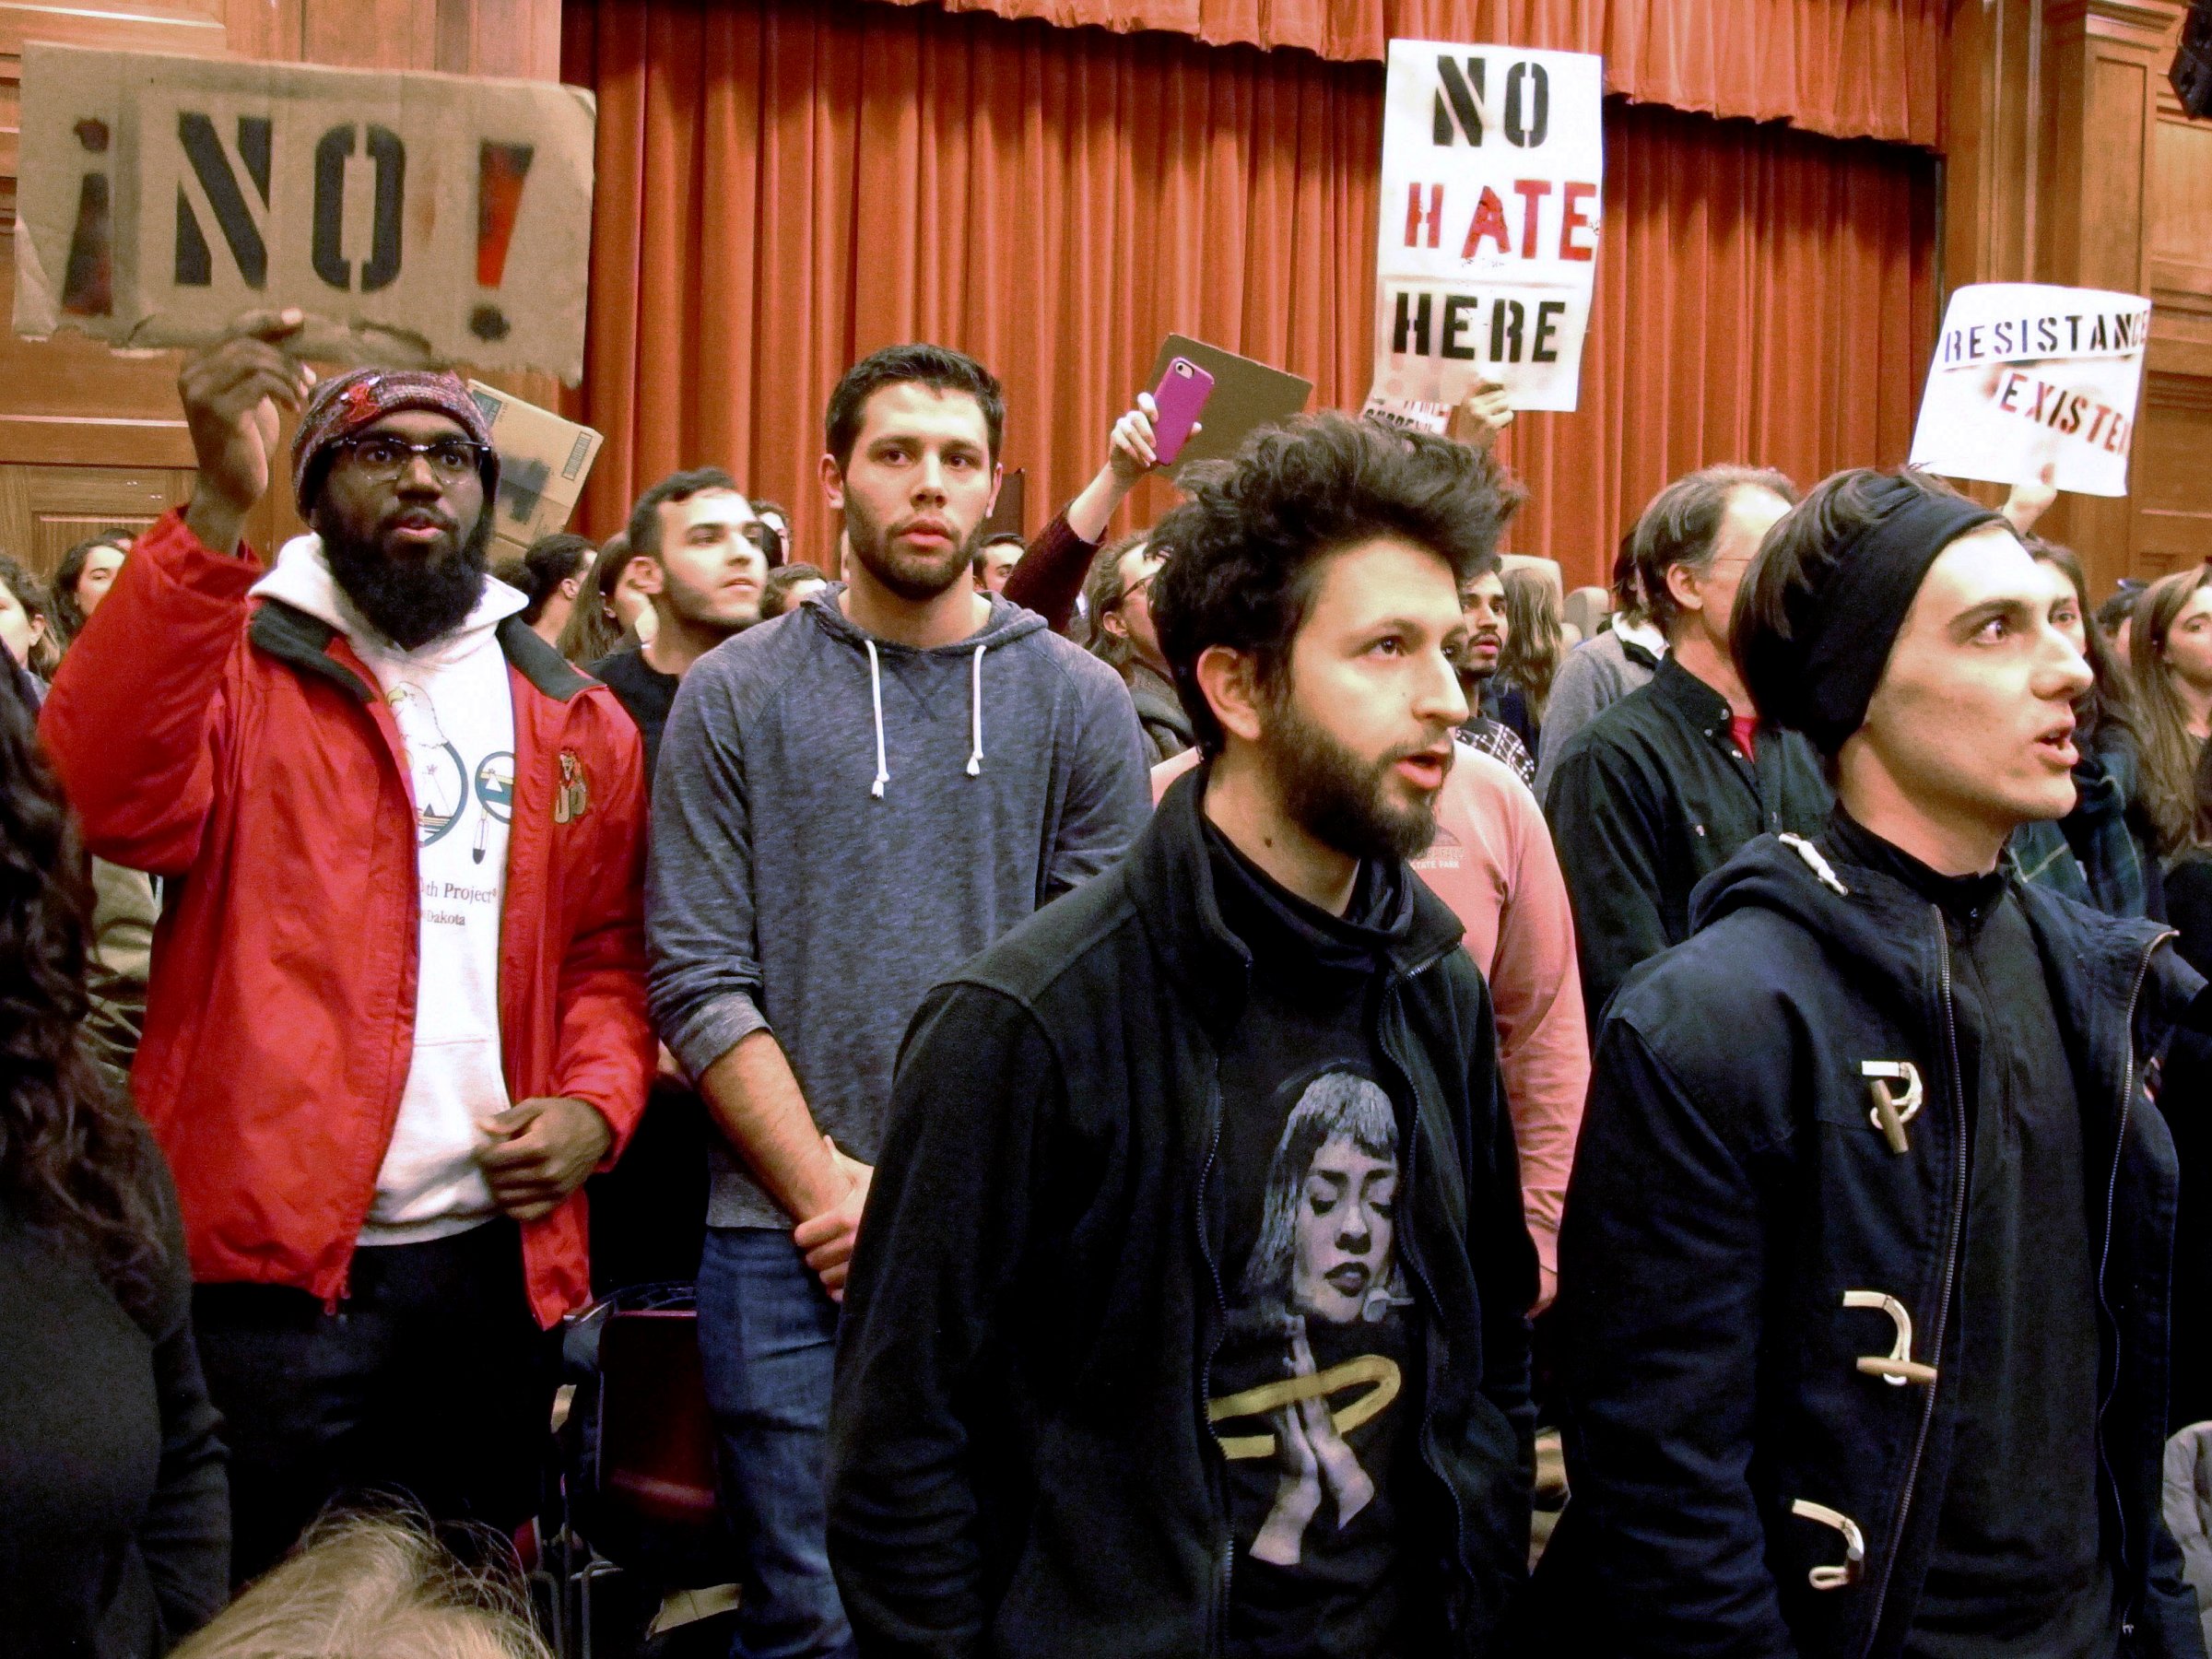 In this March 2, 2017, file photo, Middlebury College students turn their backs to Charles Murray, unseen, during his lecture in Middlebury, Vt. Hundreds of students protested his lecture, forcing the college to move his talk to an undisclosed campus location from which it was live-streamed to the original venue. Since the beginning of 2016, more than two dozen campus speeches have been derailed amid controversy, according to the Foundation For Individual Rights In Education, a group that monitors free speech on campuses.